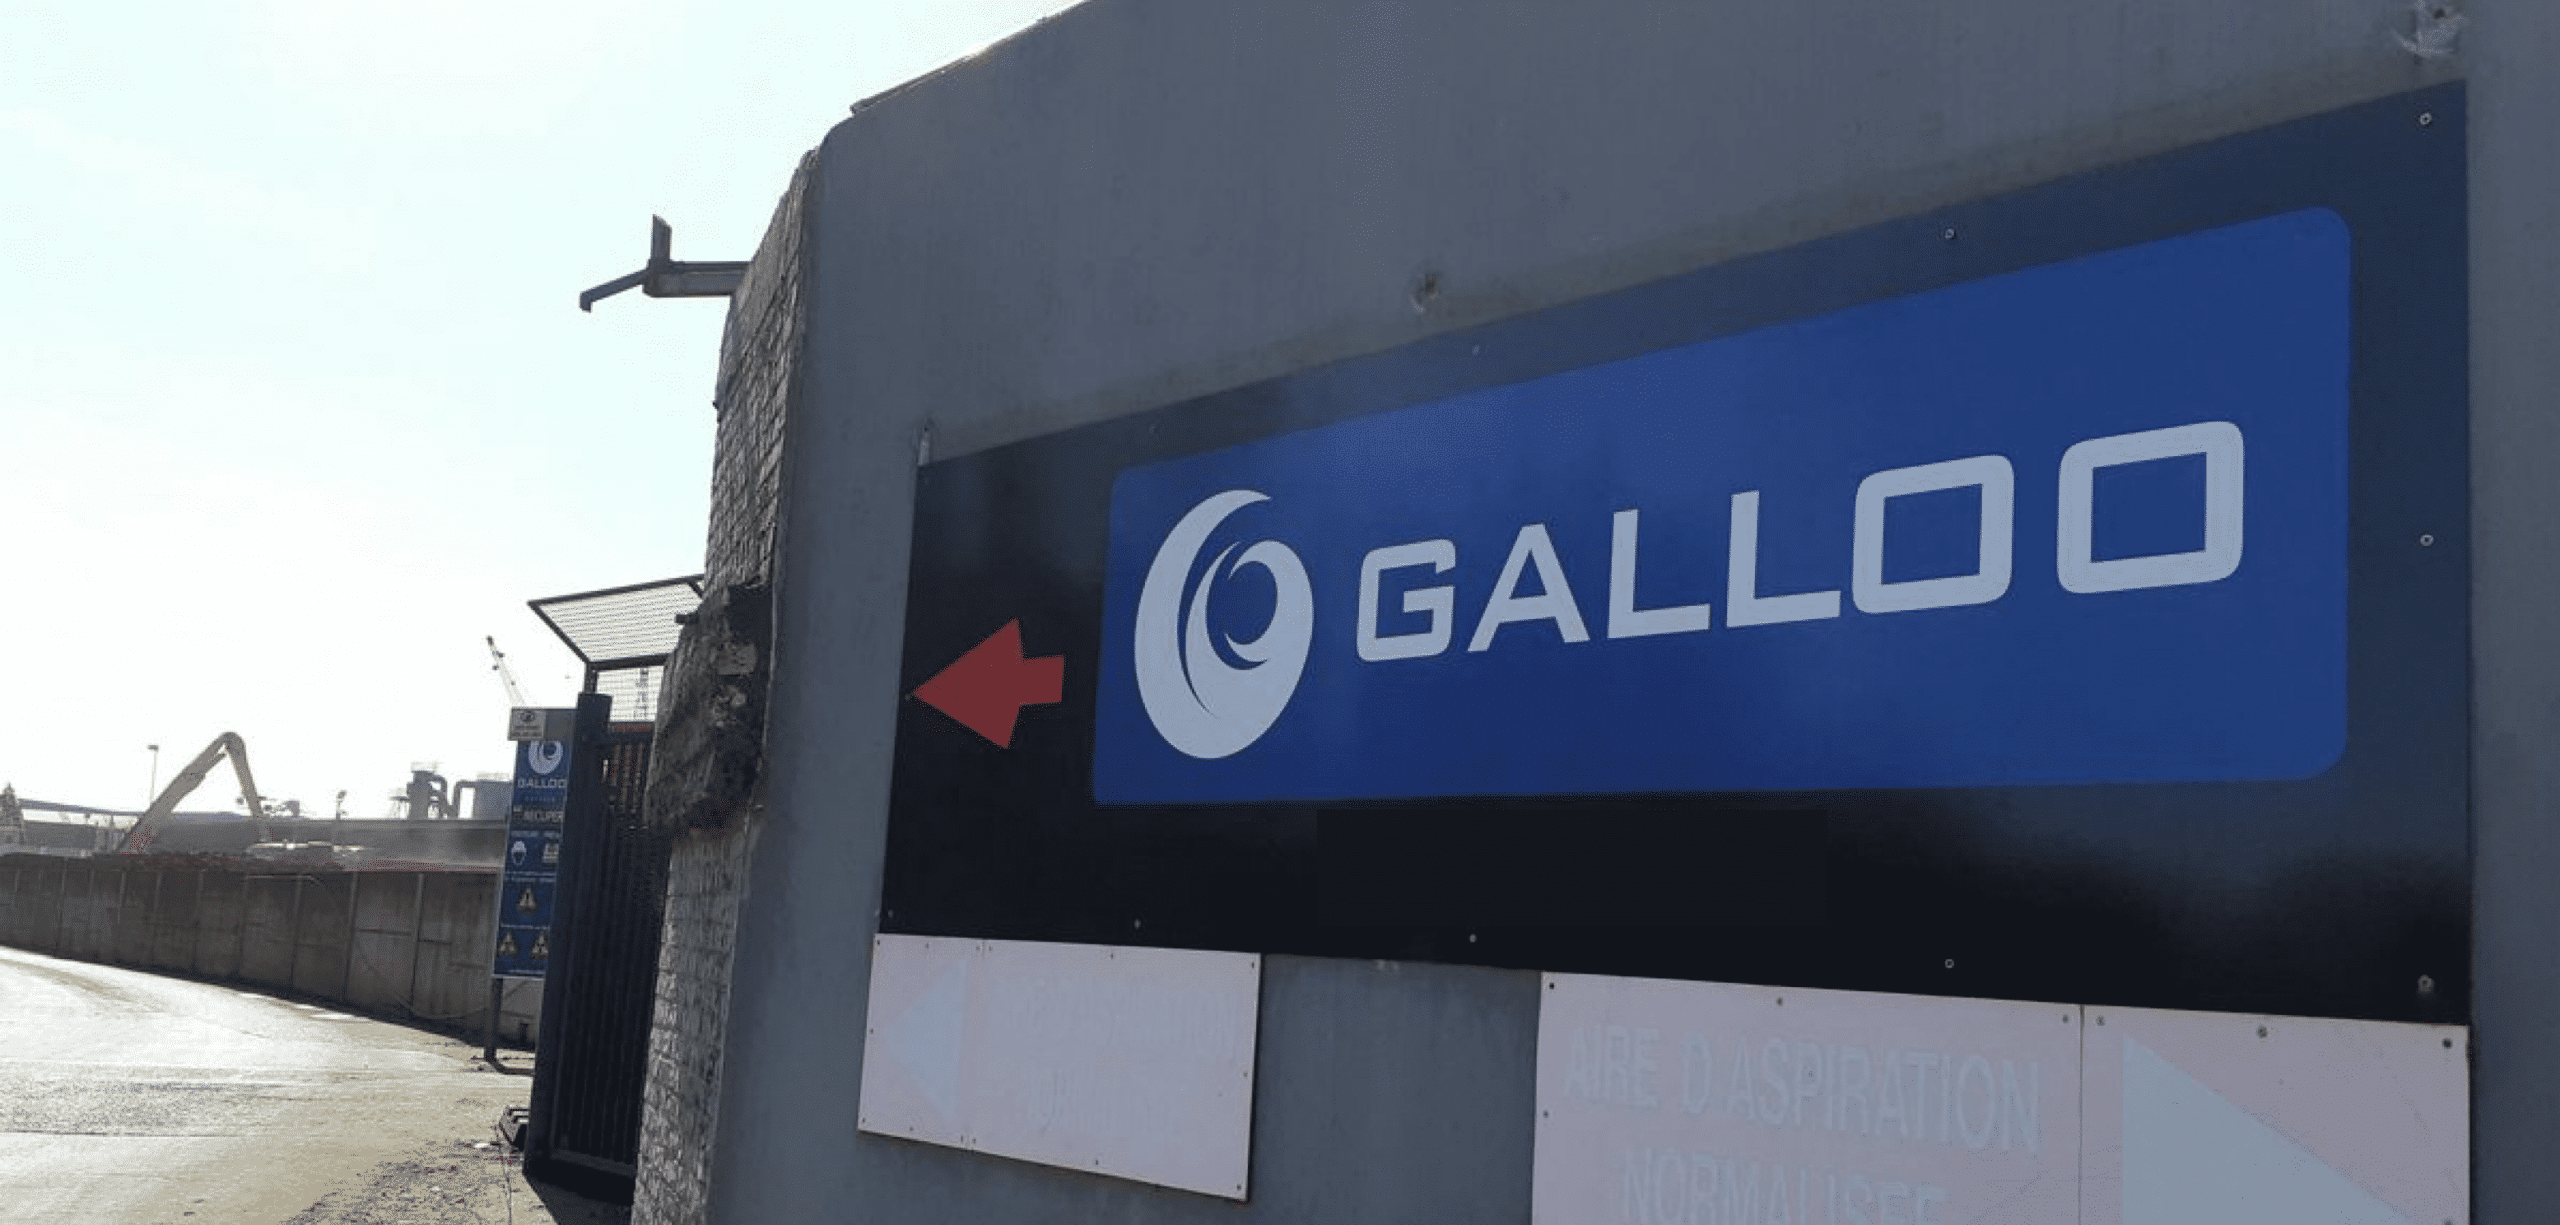 The Belgian company Galloo Recycling is investing €28 million by choosing the Hauts-de-France Region for its establishment.